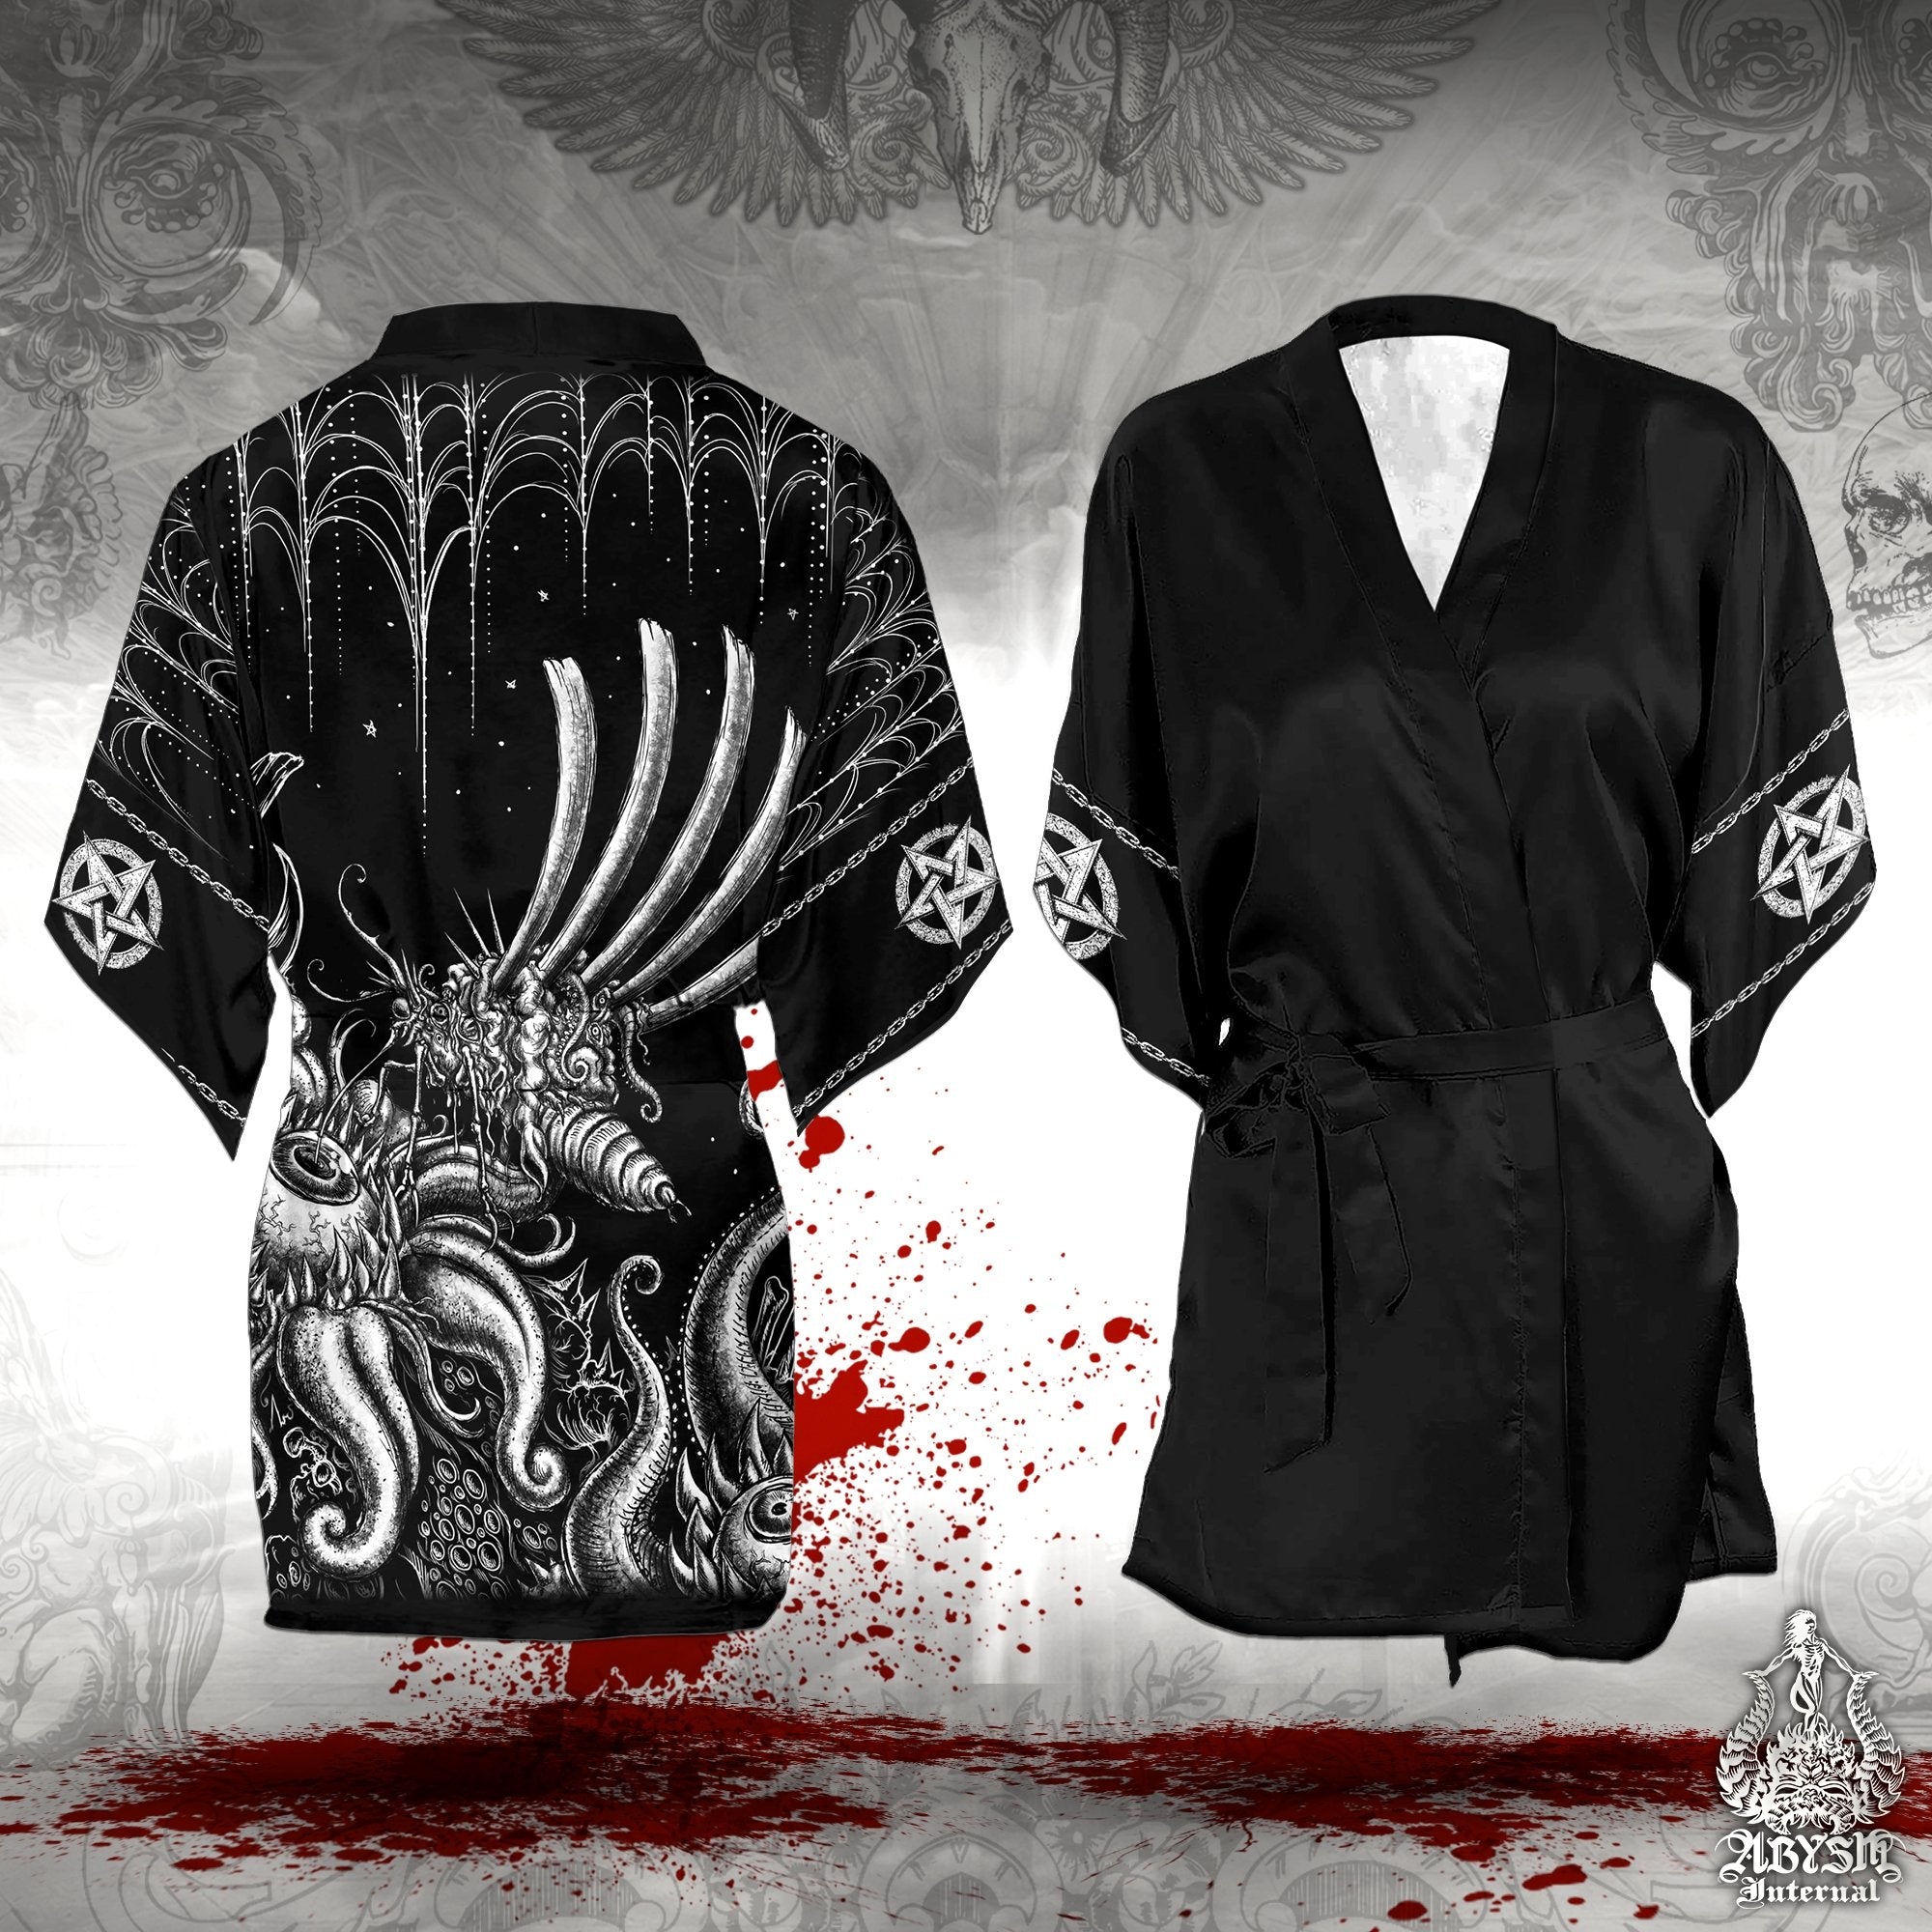 Horror Cover Up, Beach Outfit, Party Kimono, Metal Summer Festival Robe, Alternative Clothing, Unisex - Goth Hell, Bloodfly - Abysm Internal